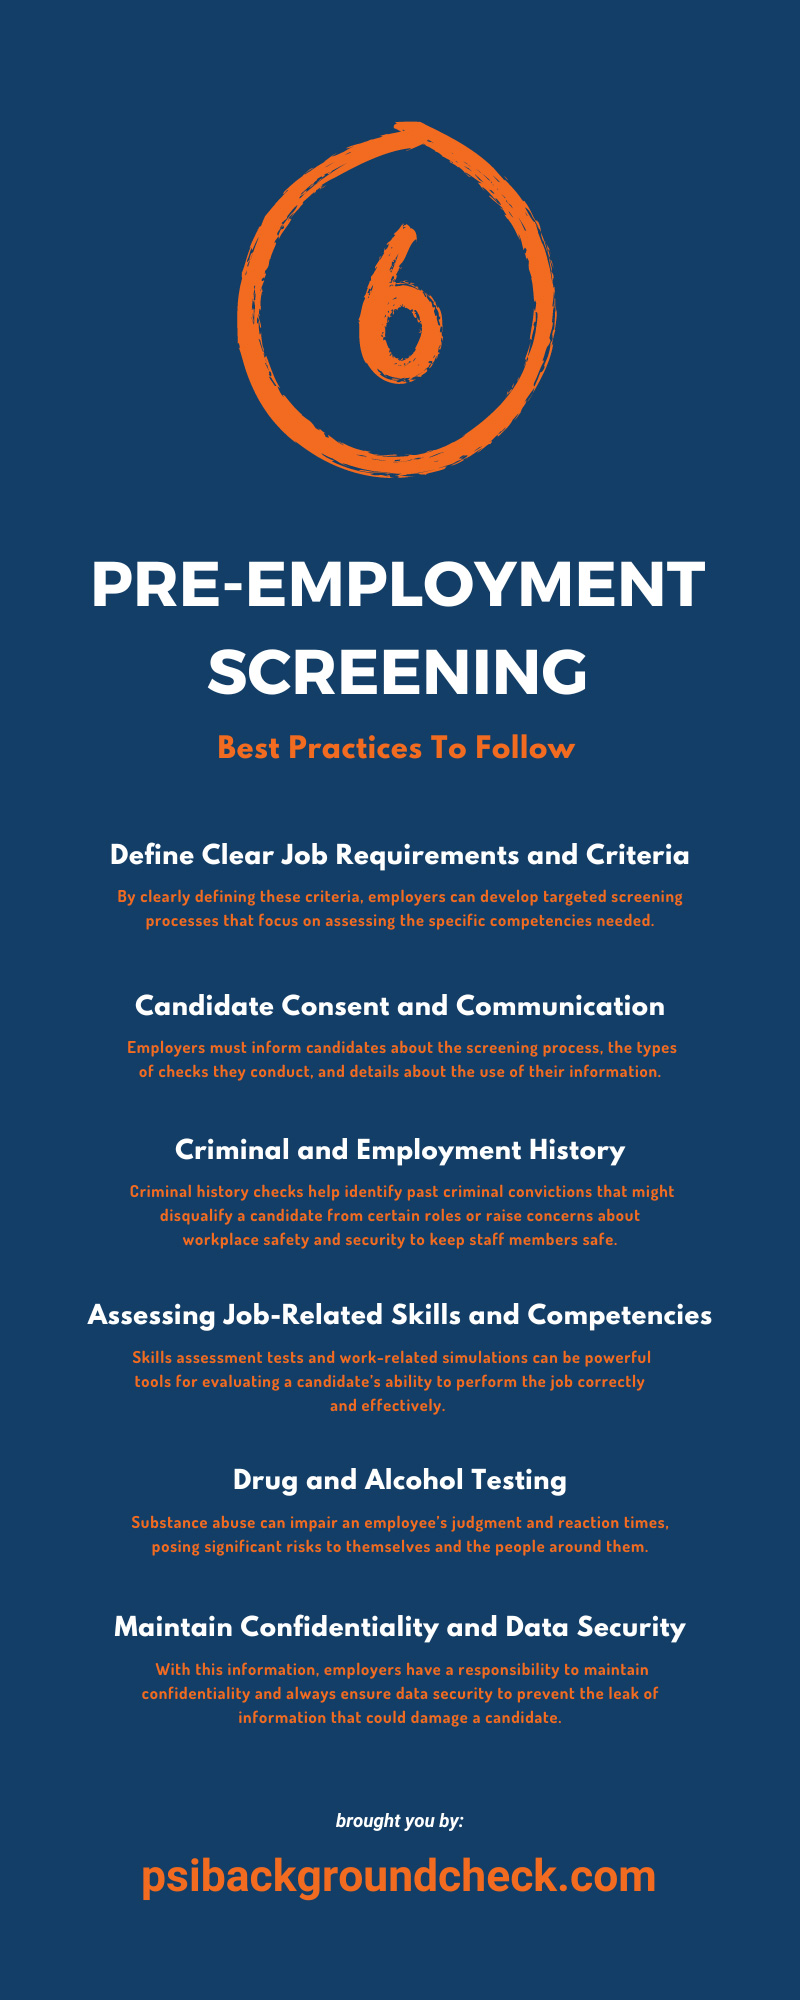 6 Pre-Employment Screening Best Practices To Follow